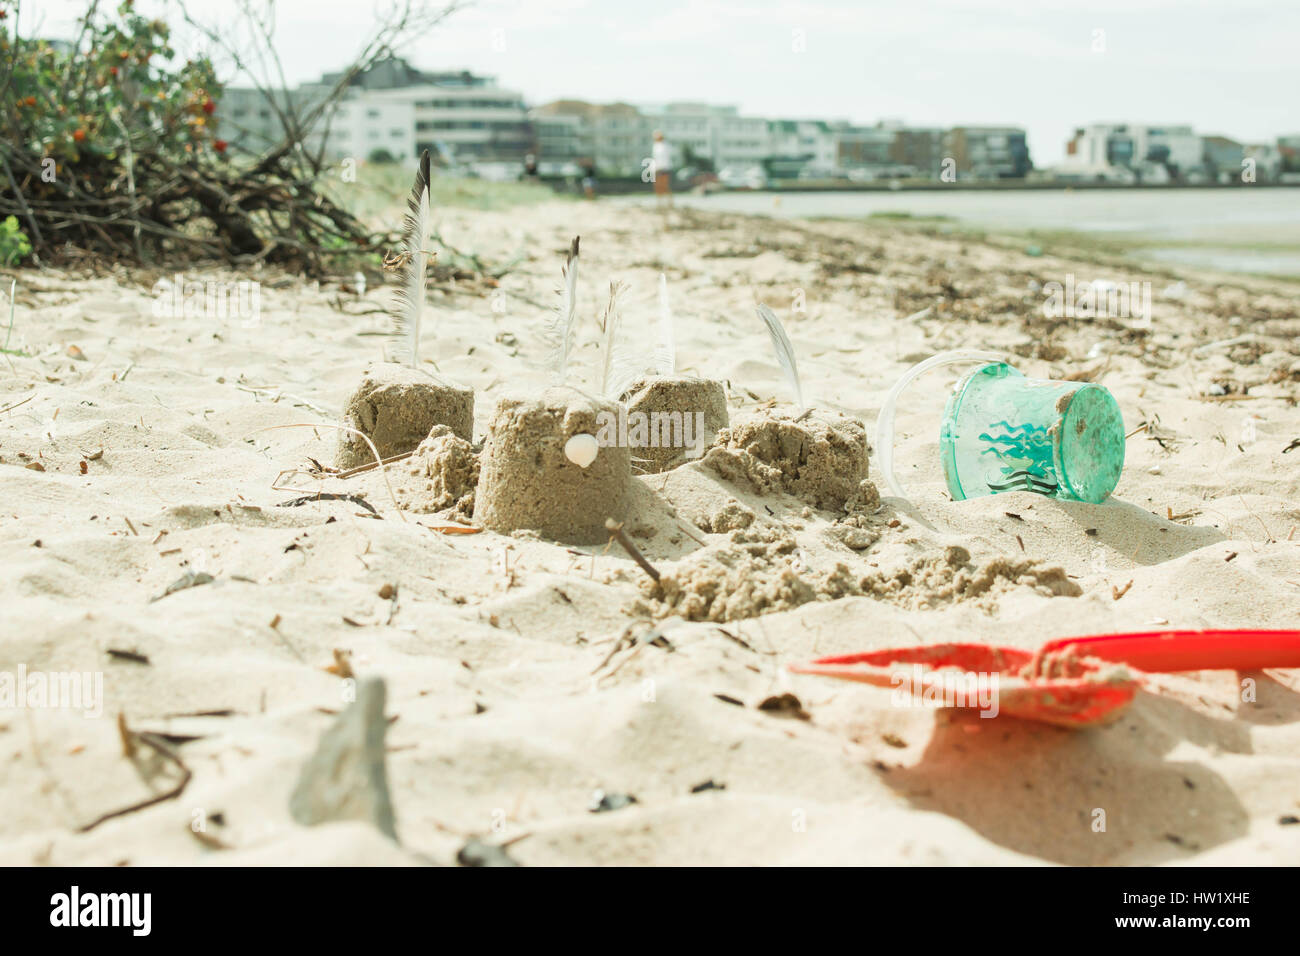 Sandcastles on a beach with spade and bucket. Stock Photo